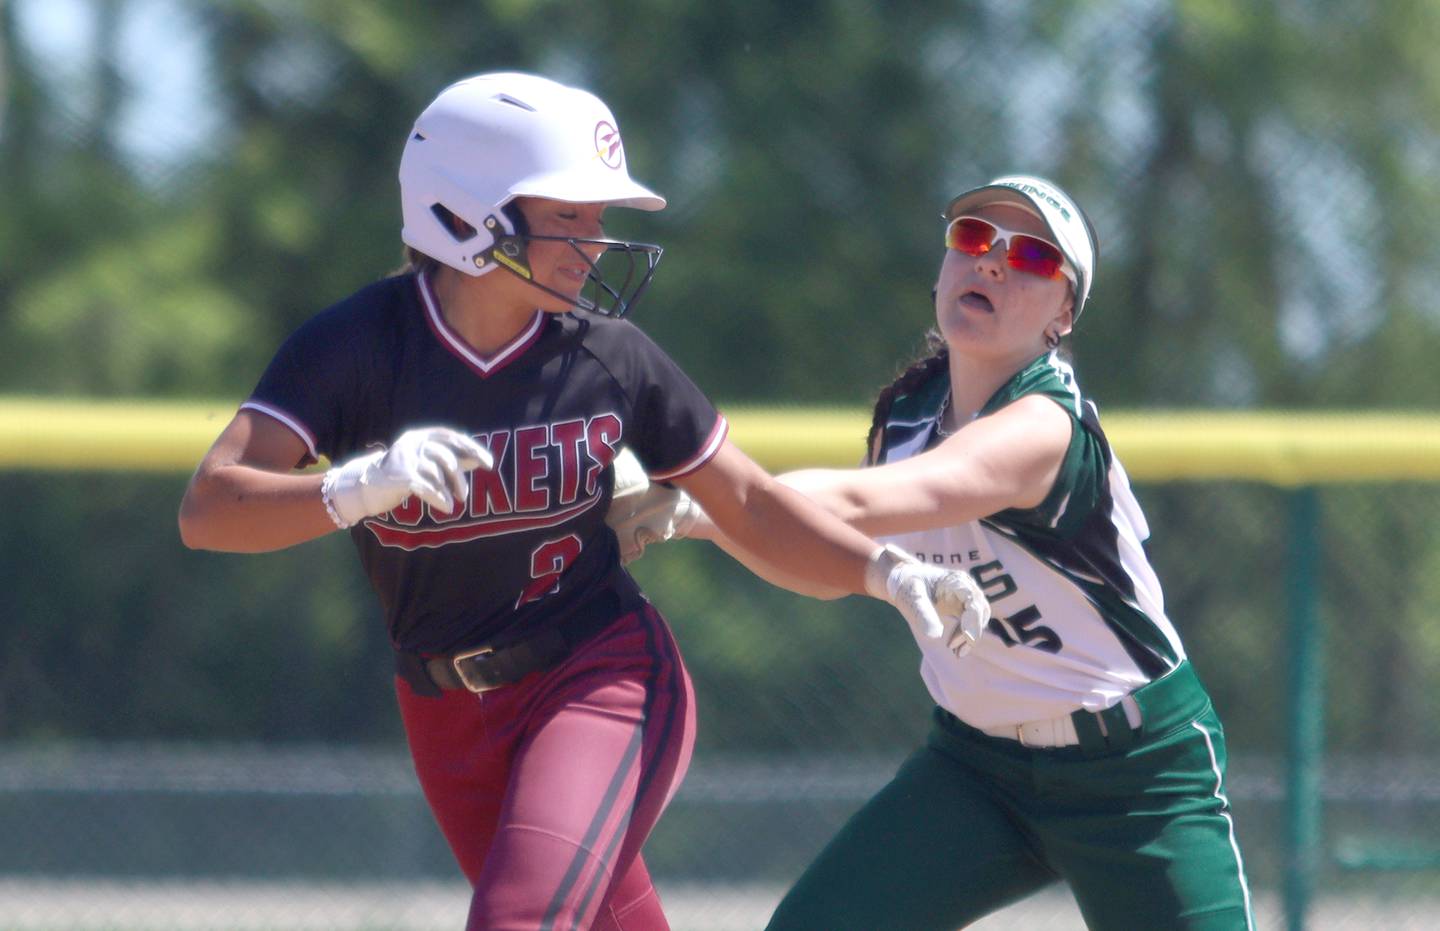 Richmond-Burton’s Adriana Portera, left, is tagged out on a rundown by North Boone’s Sydney Goodman during Class 2A softball sectional final action at Marengo Saturday.